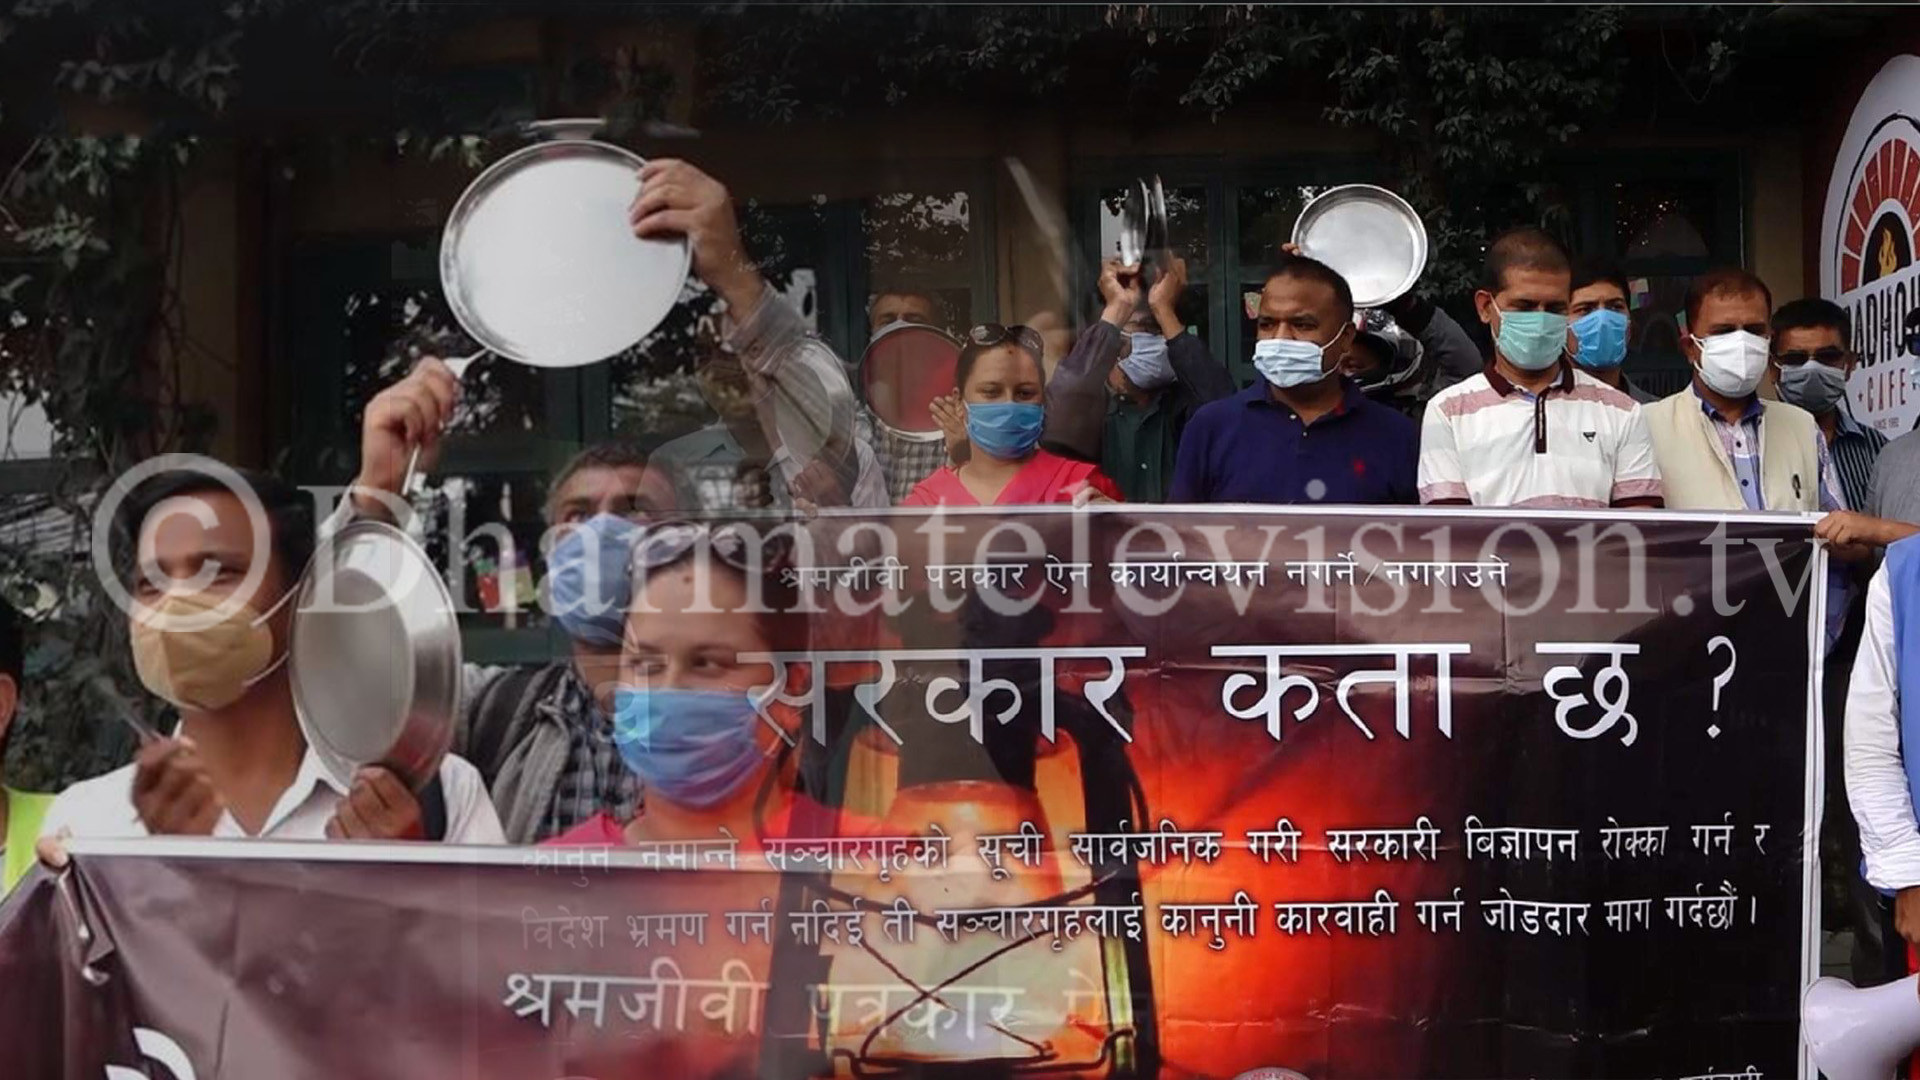 Demonstration by journalists by banging plates